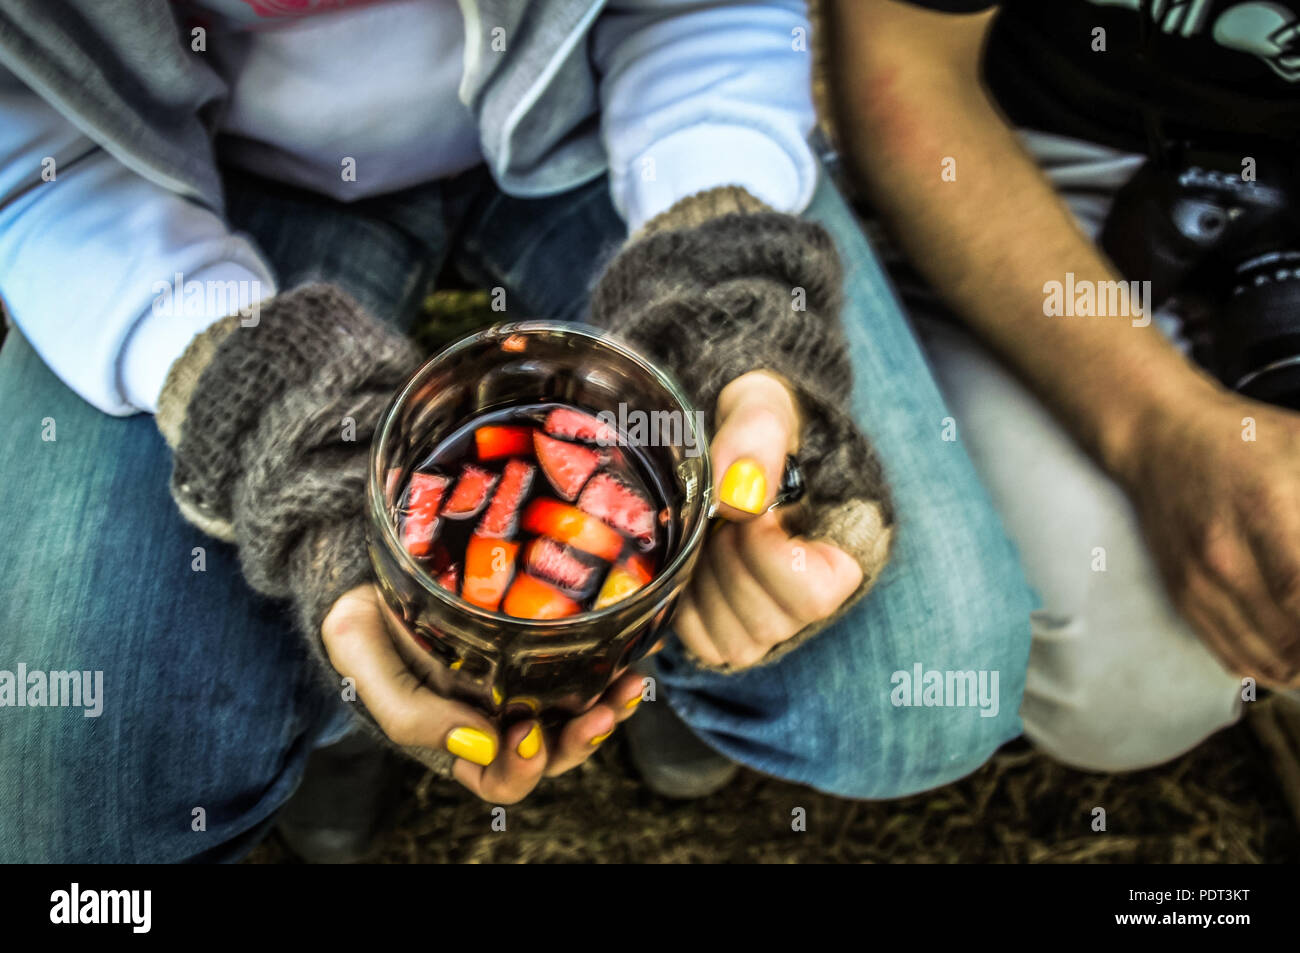 Top drunk view of the girl's hands holding a big glass mug with hot mulled wine. World through the eyes of a drunk concept Stock Photo